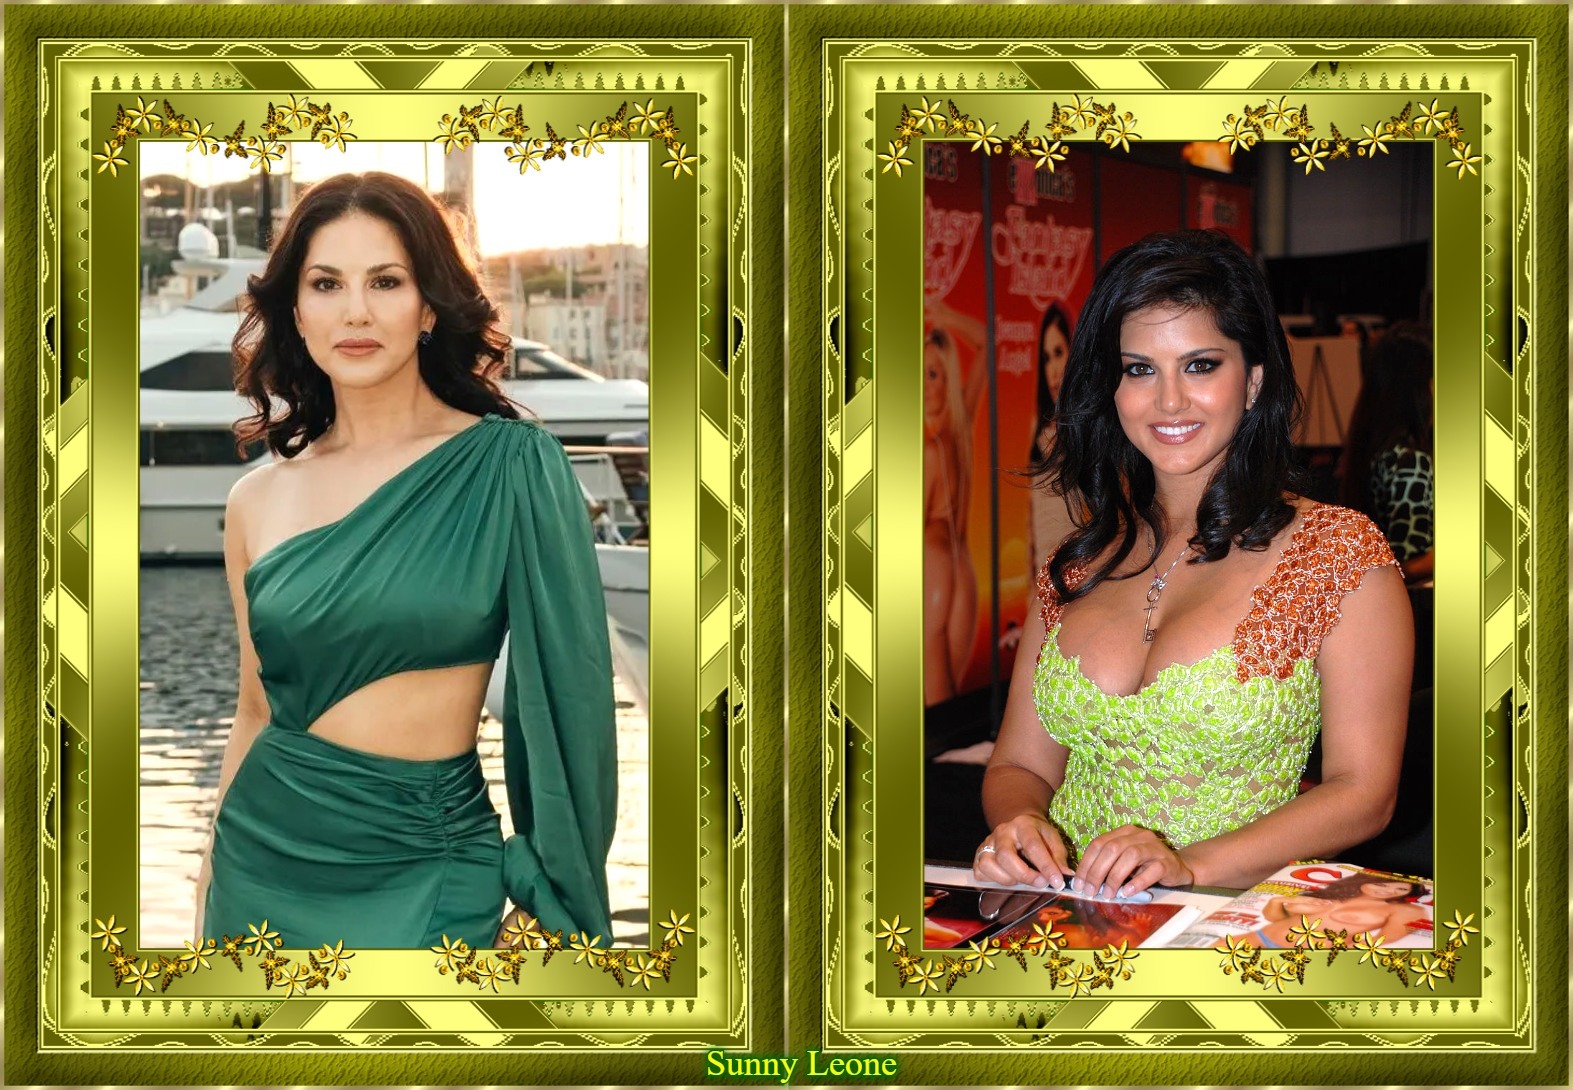 Read more about the article “From Porn To Films- Sunny Leone”